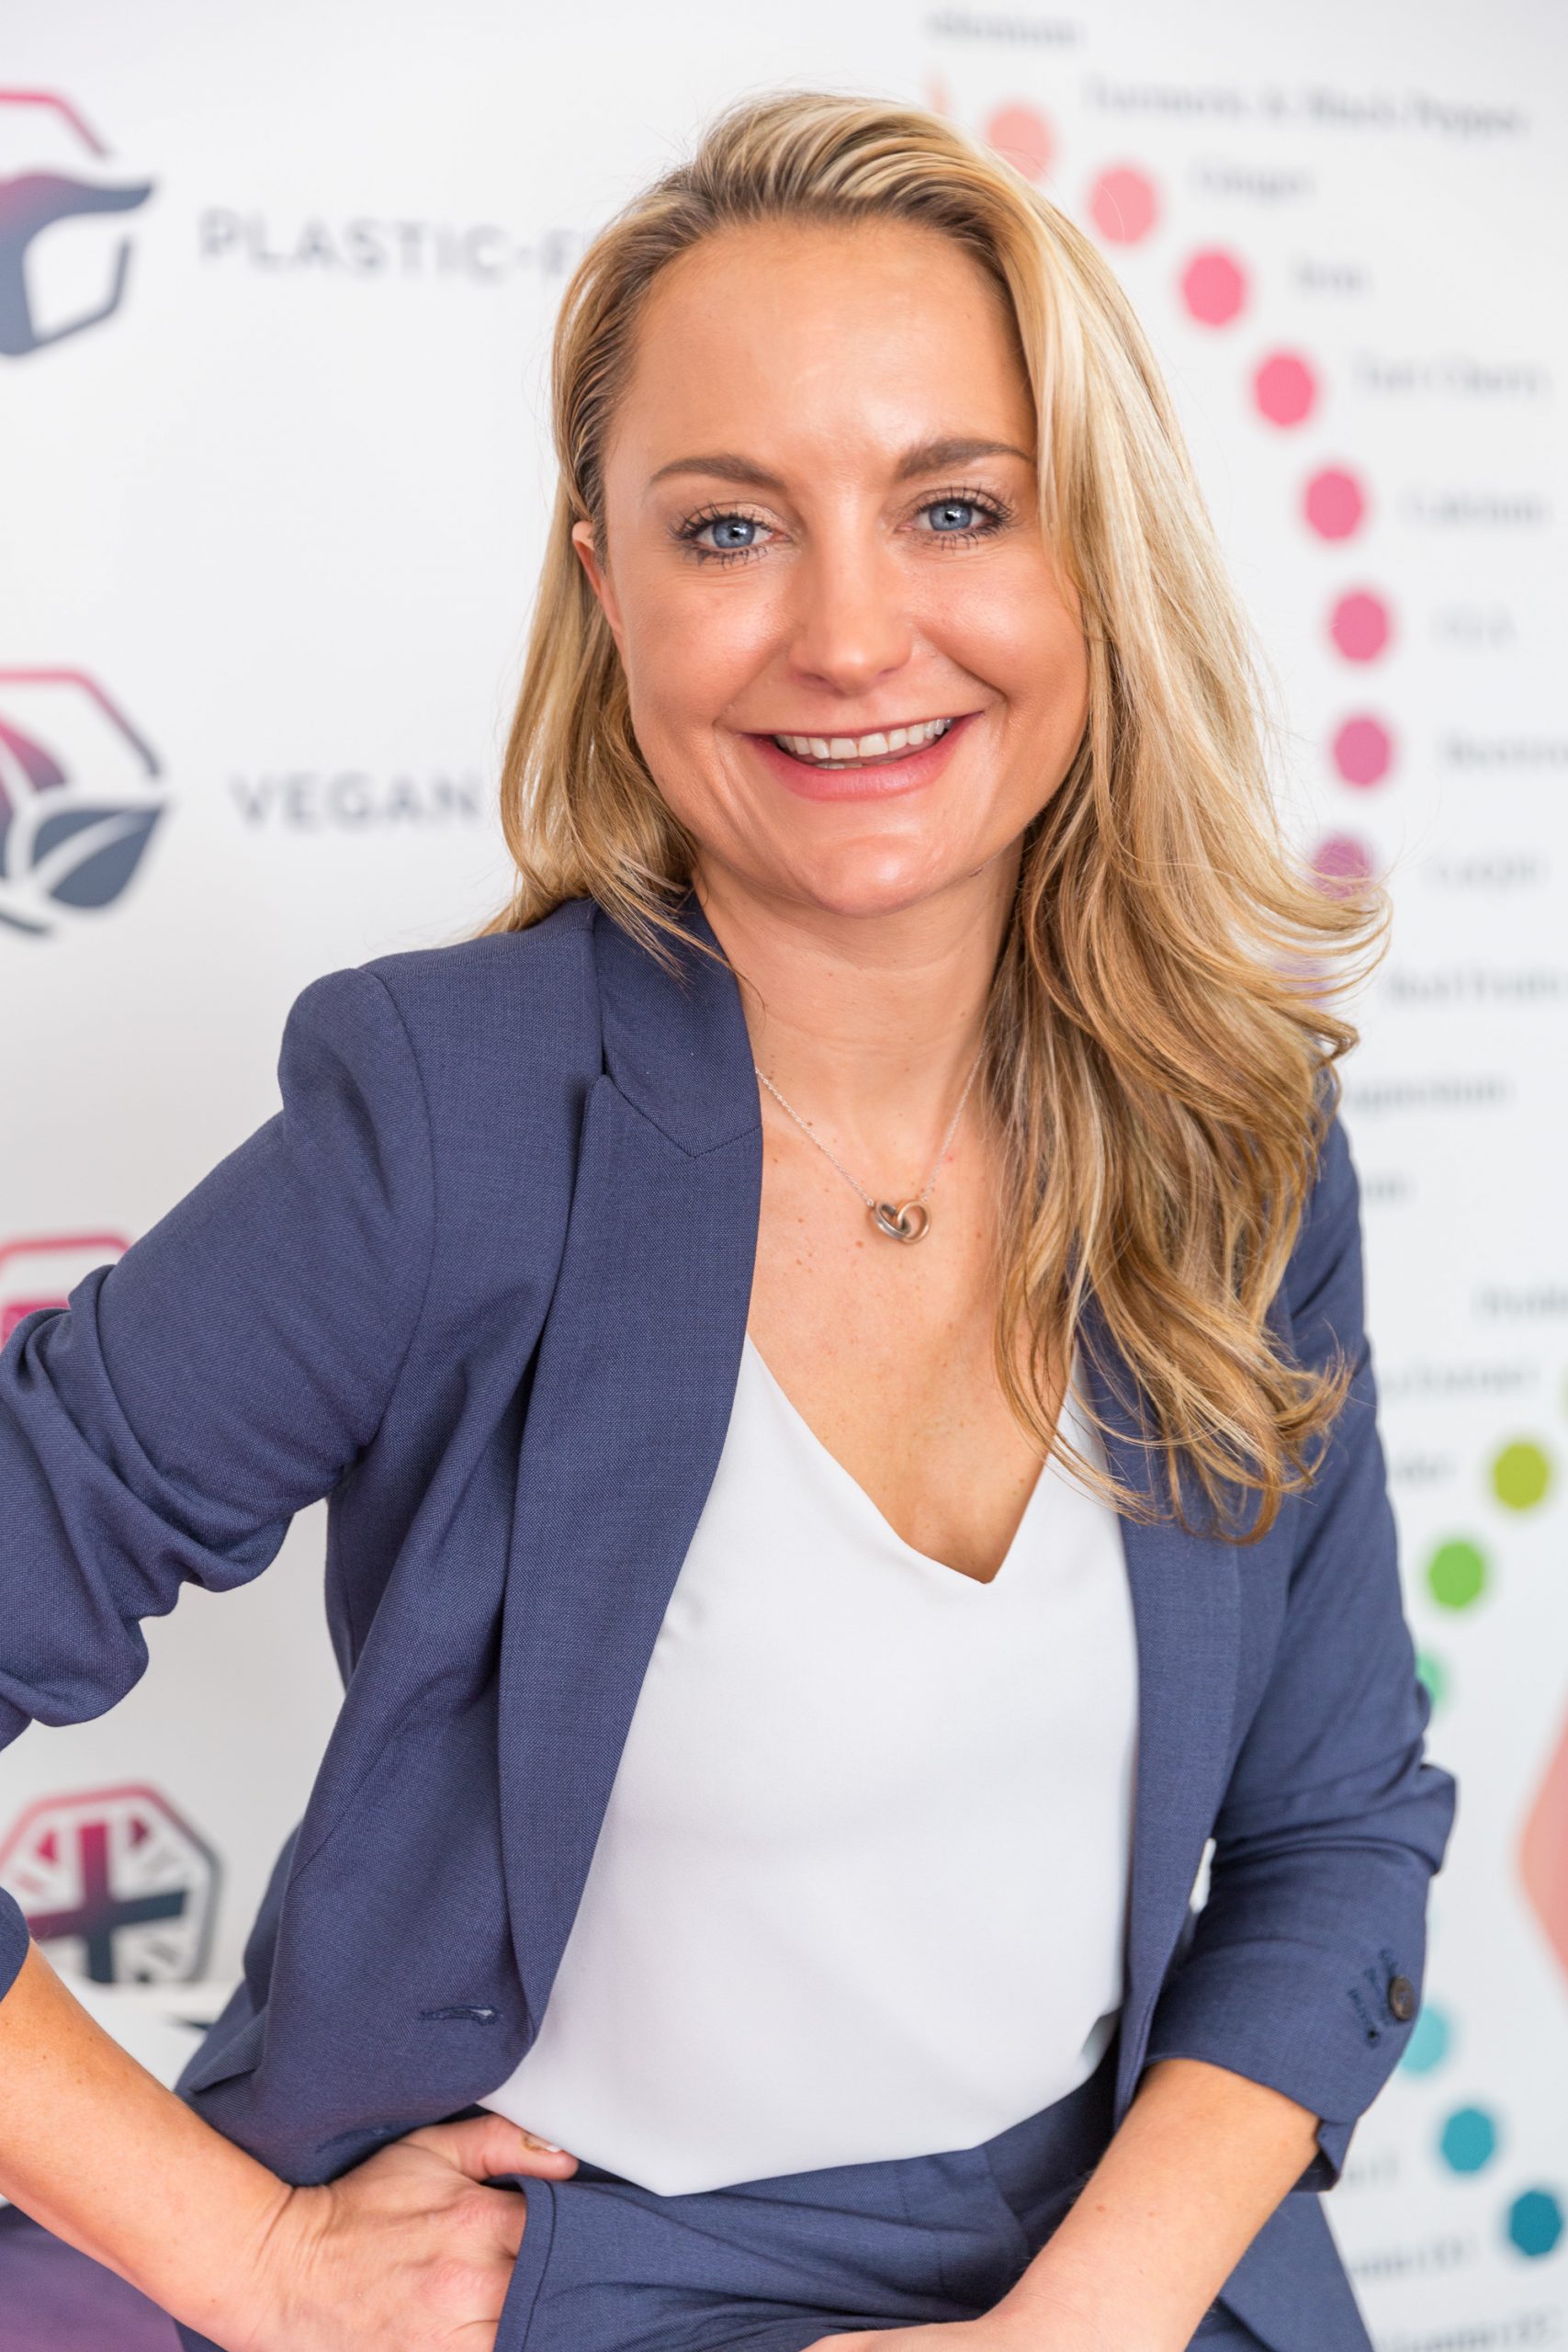 Inspirational Woman: Melissa Snover | Founder & CEO, Rem3dy Group